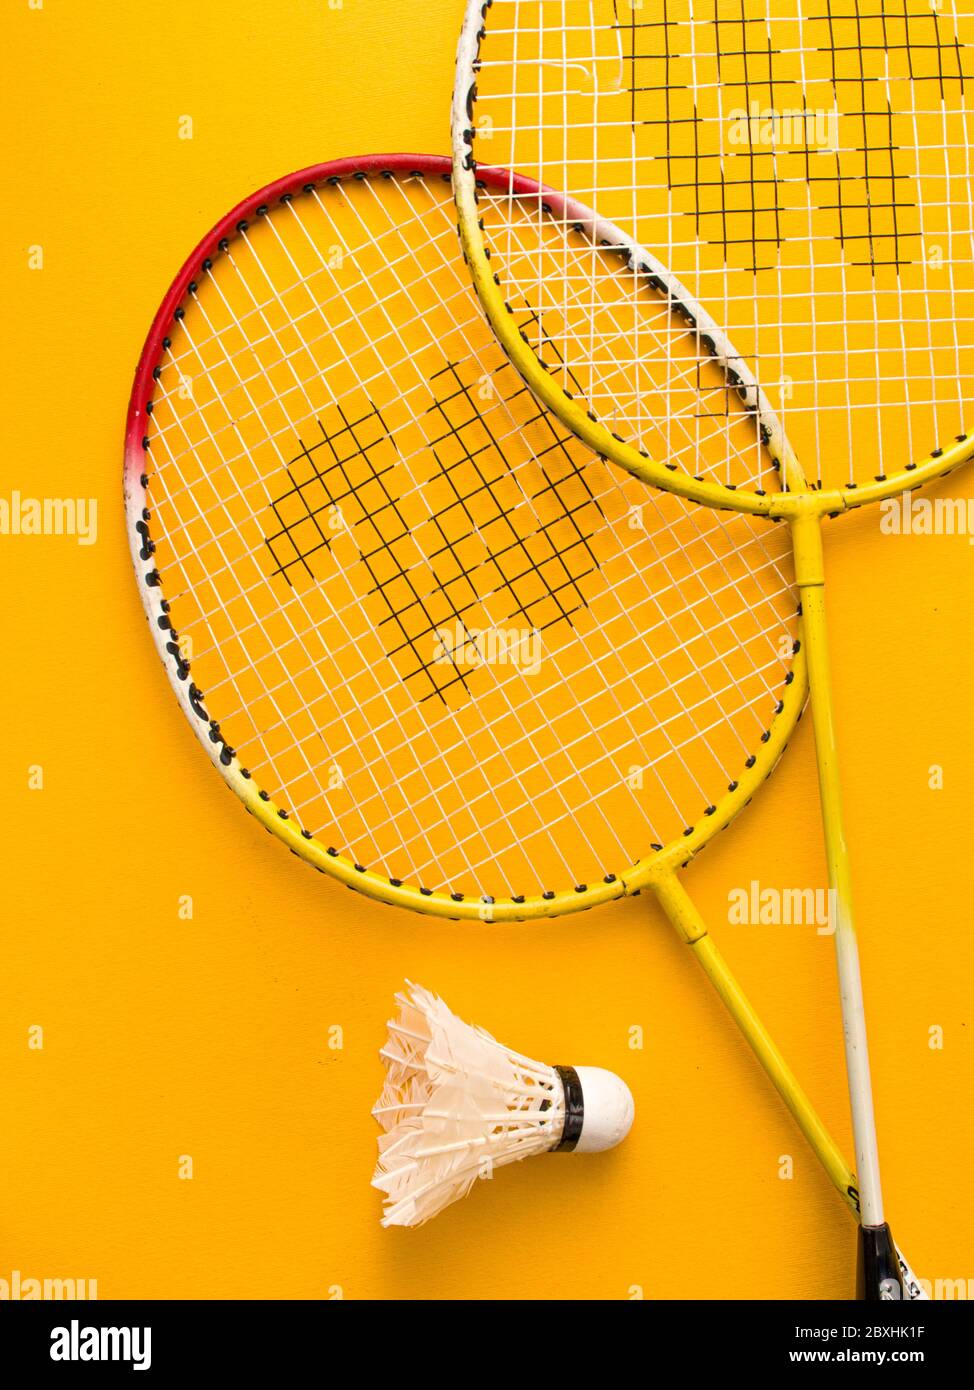 Badminton racket and White Feather Shuttlecock with a colour green  background stock isolated image Stock Photo - Alamy